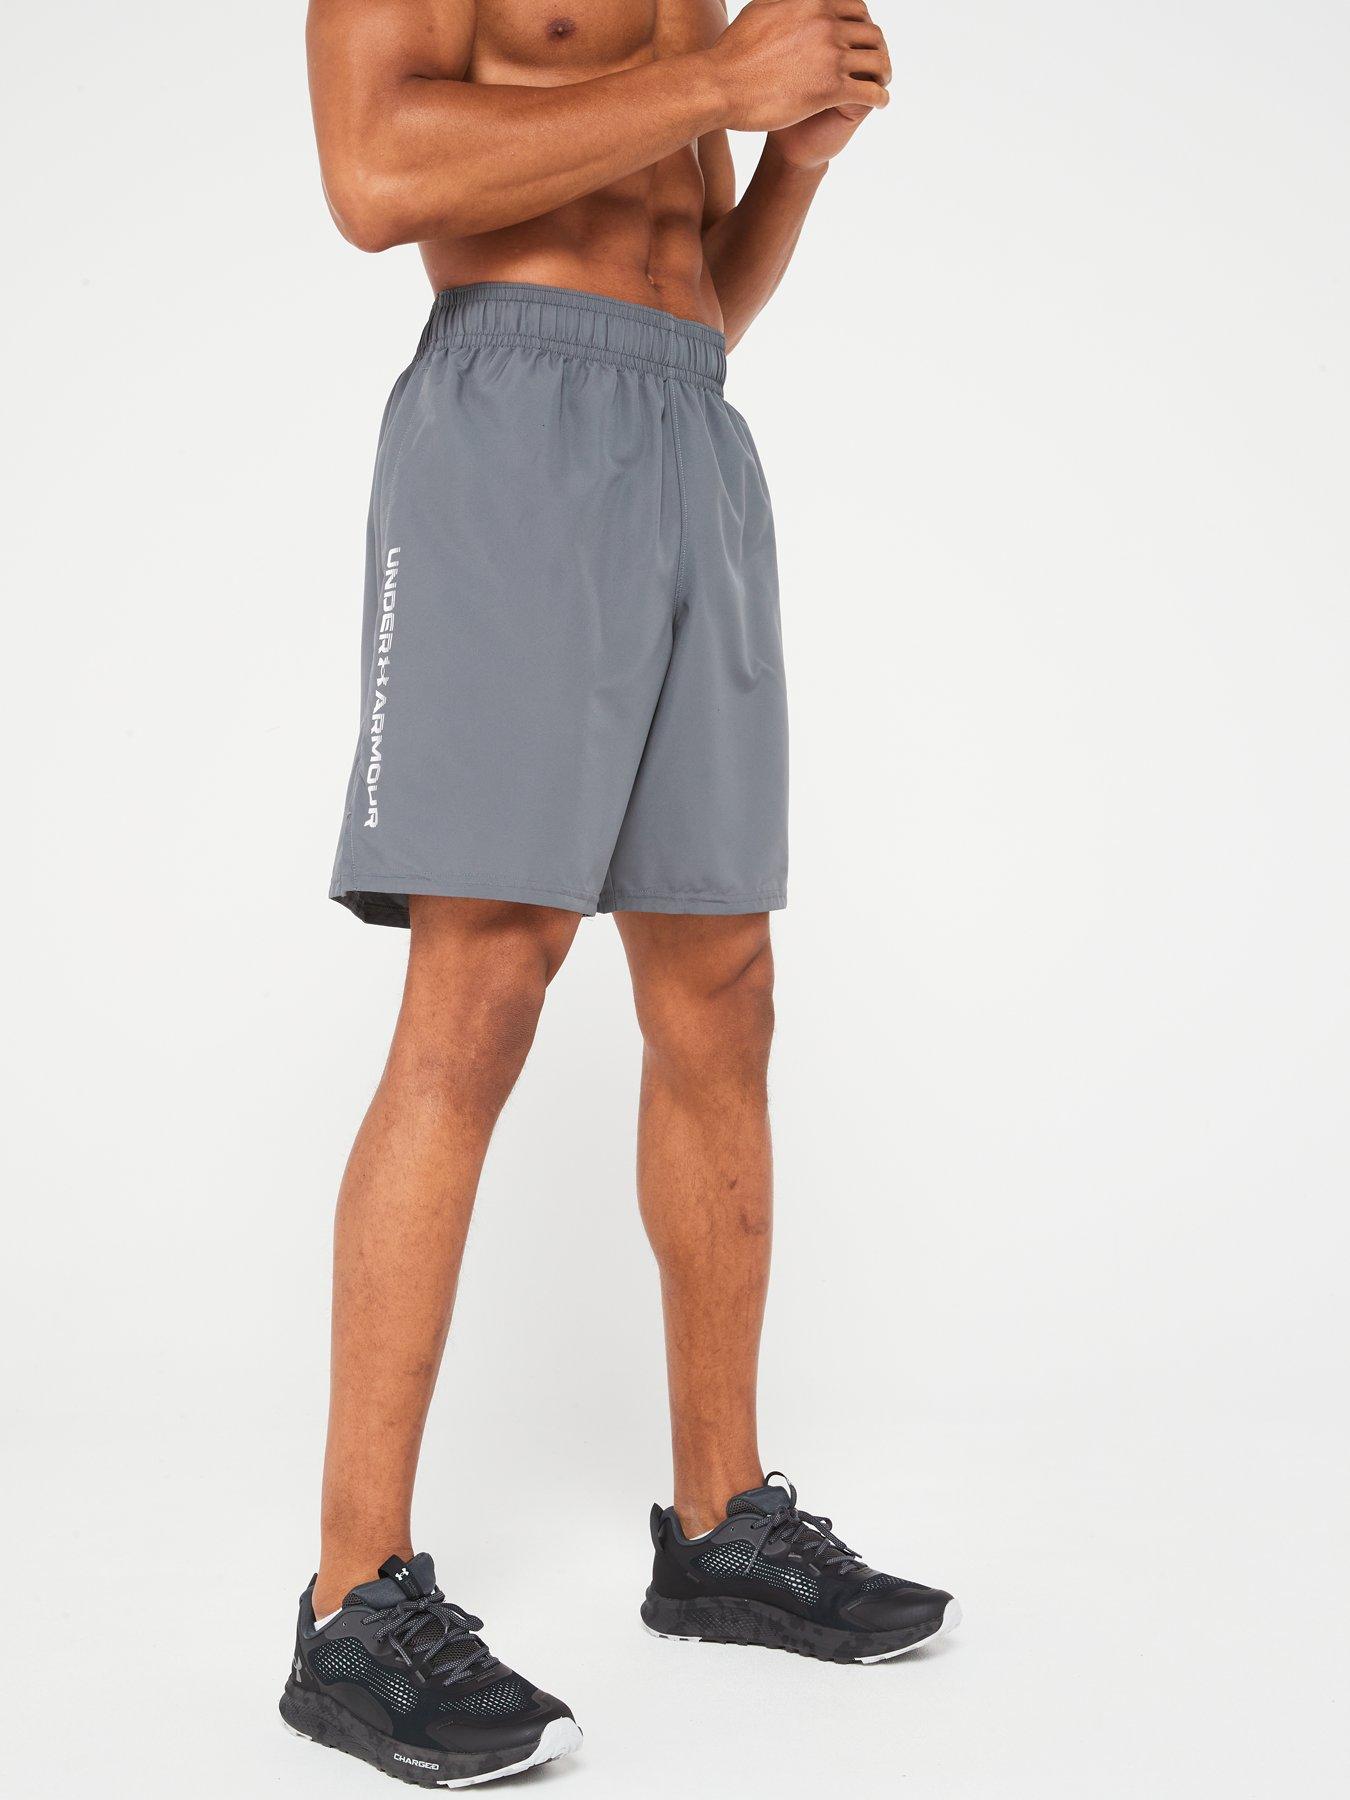 Under Armour Mens Unstoppable Cargo Shorts - Grey